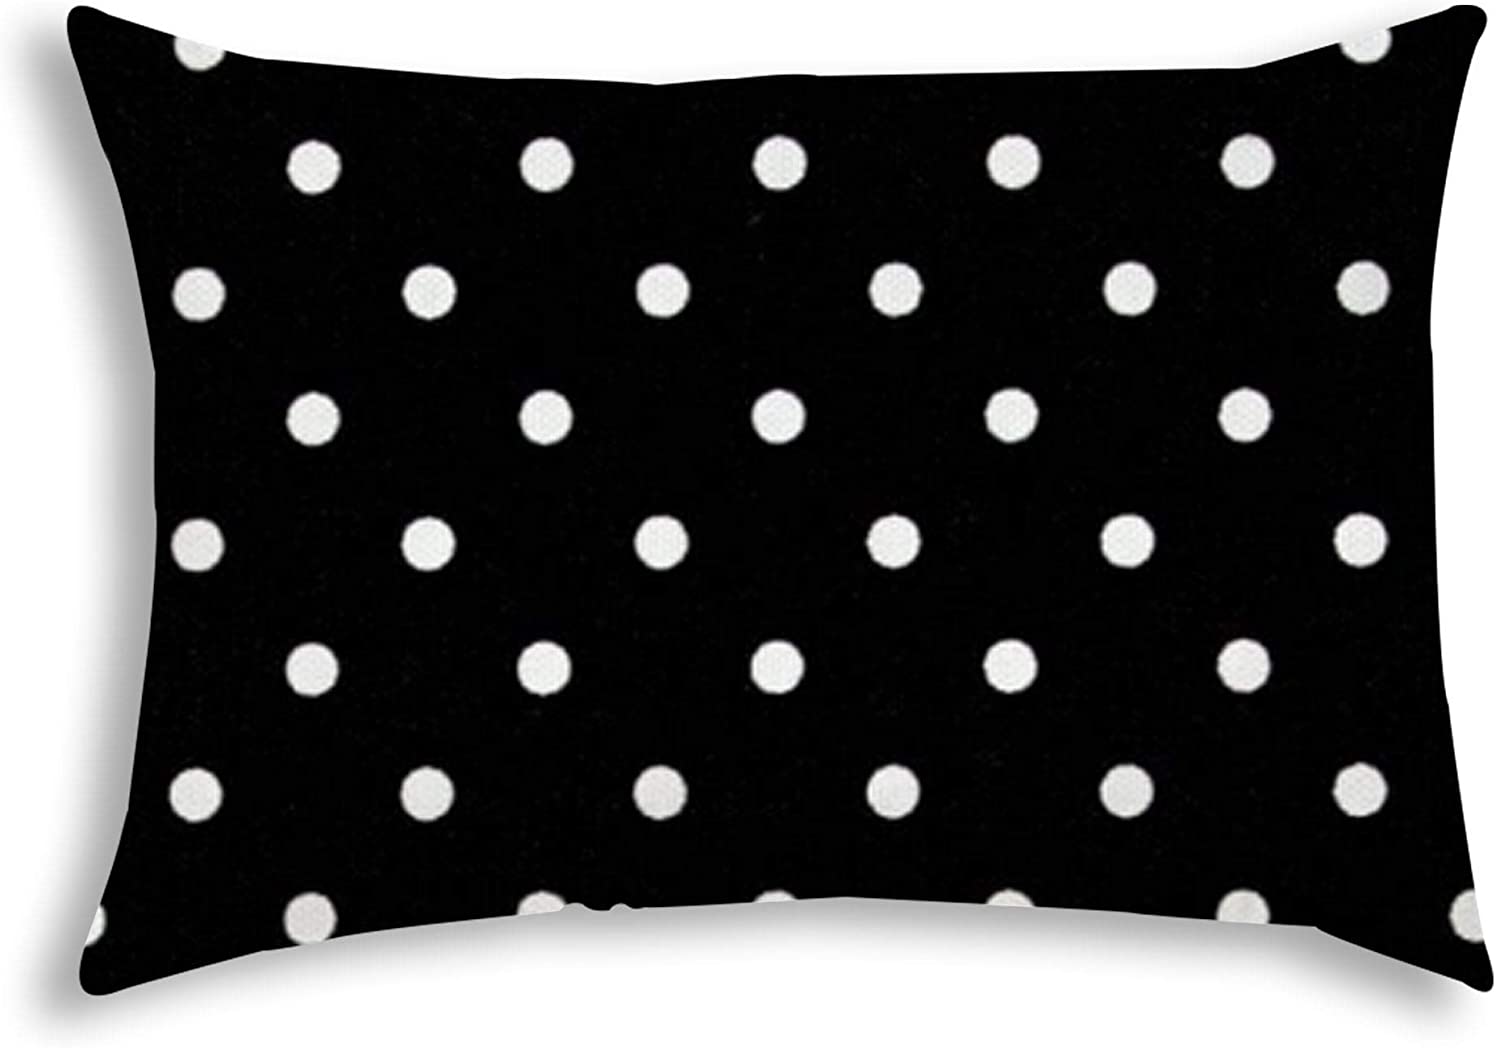 Diner Dot Black Indoor/Outdoor Pillow Sewn Closure Color Polka Dots Modern Contemporary Polyester Water Resistant